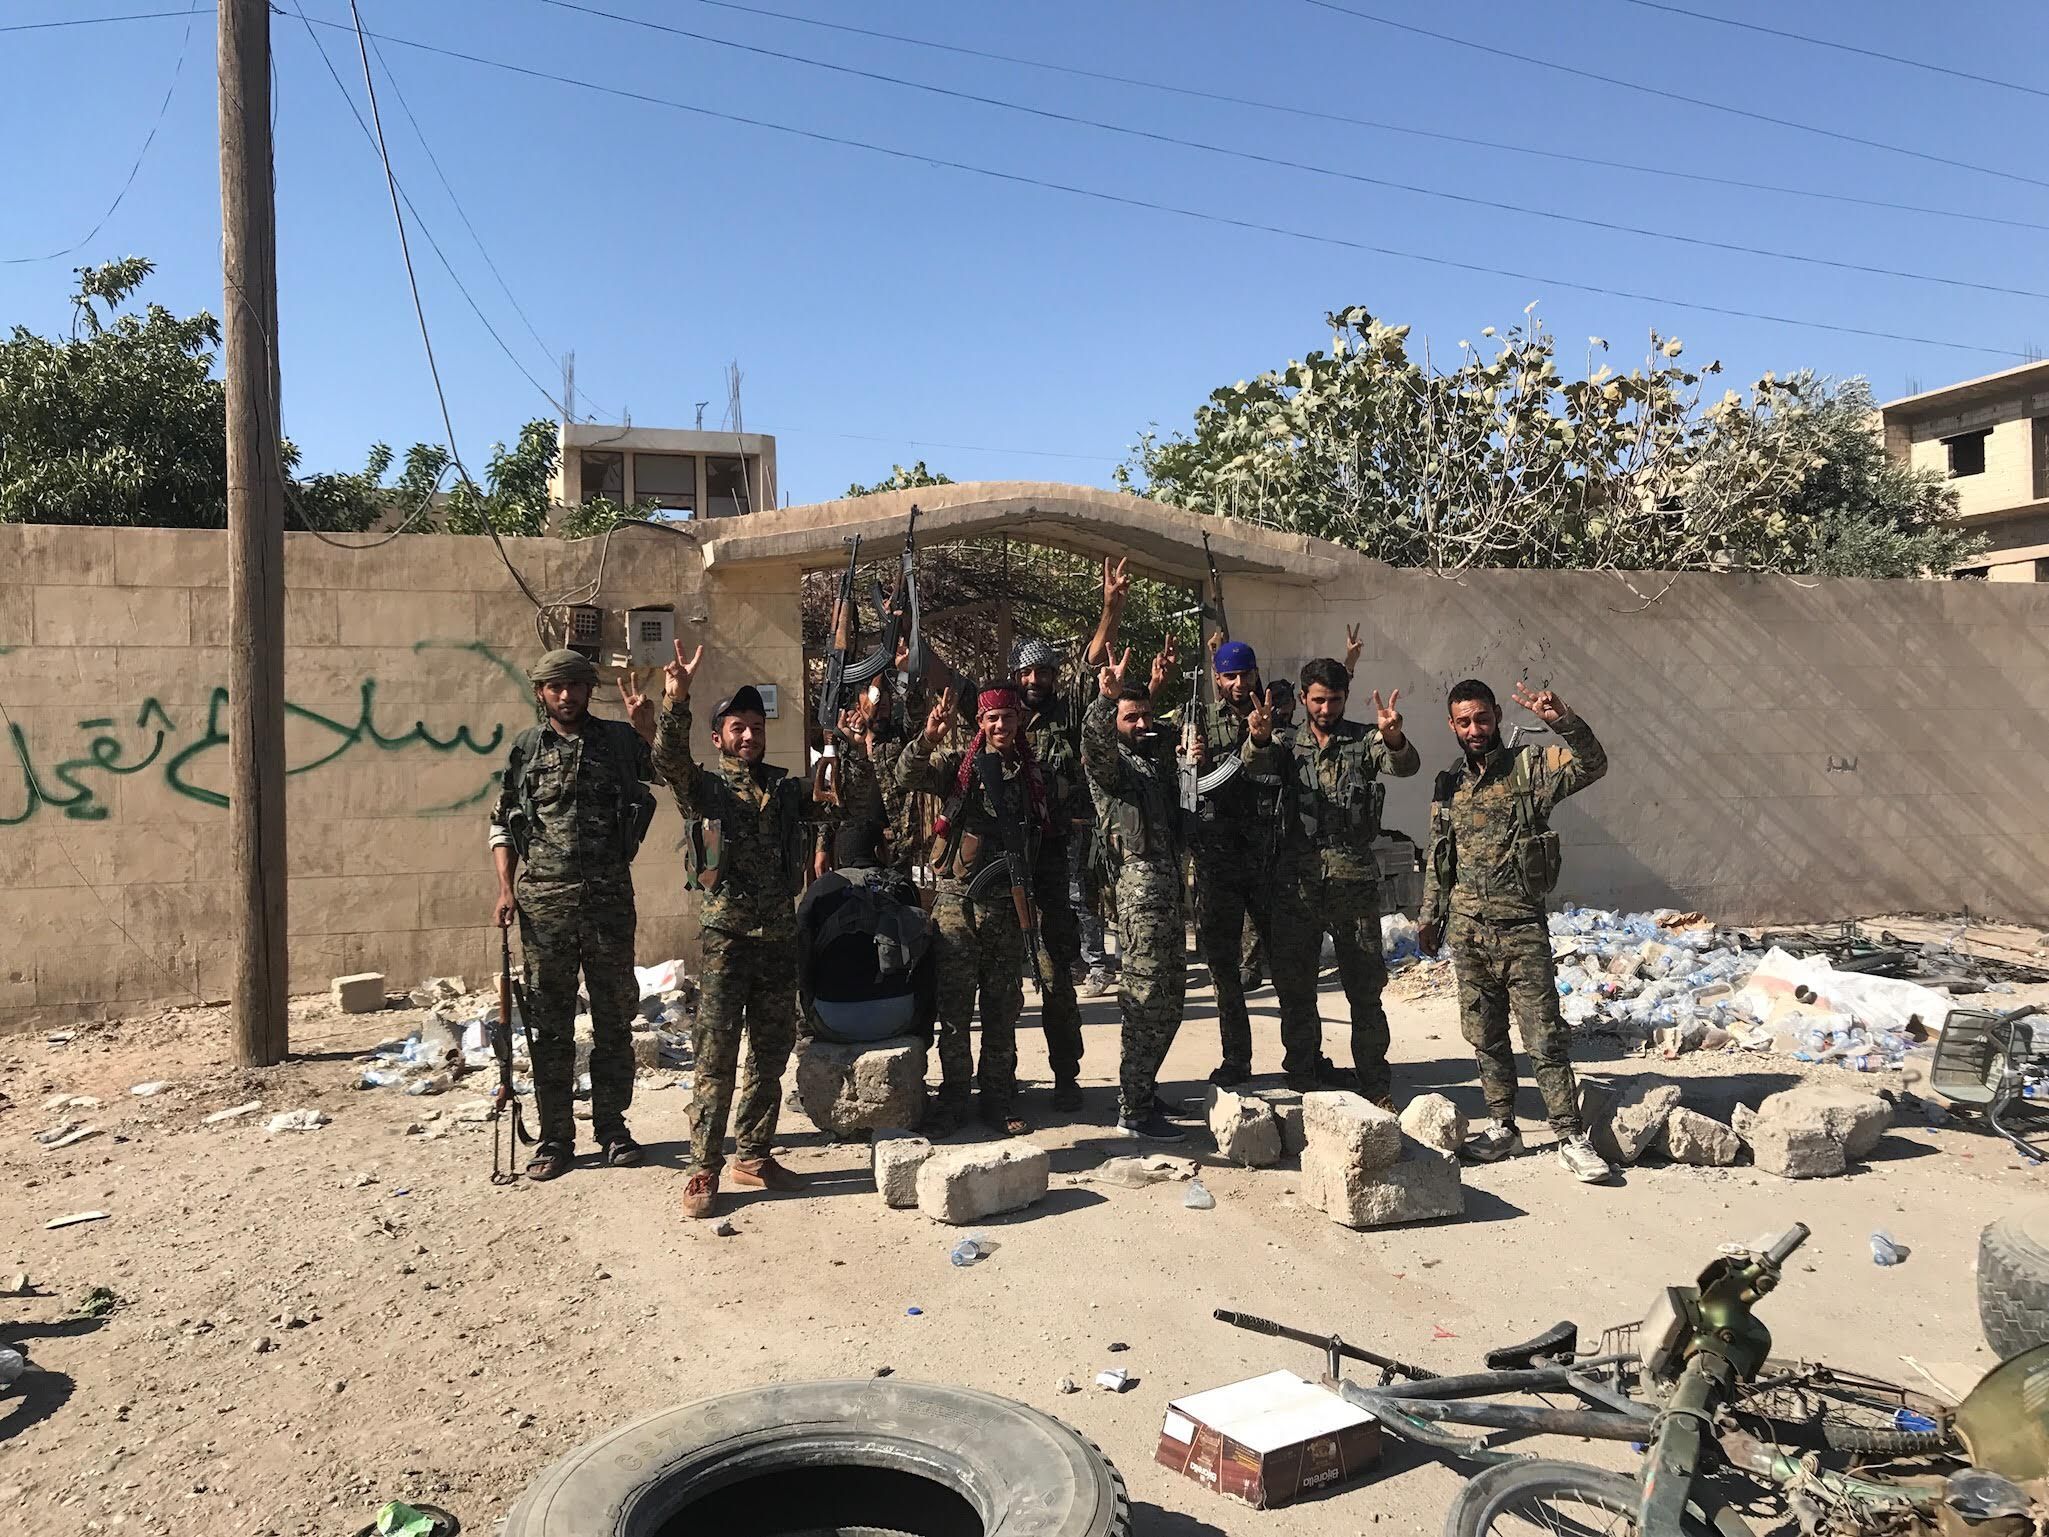 Syrian Democratic Forces just a few kilometers from the Raqqa front line. Image by Gayle Tzemach Lemmon. Syria, 2017.